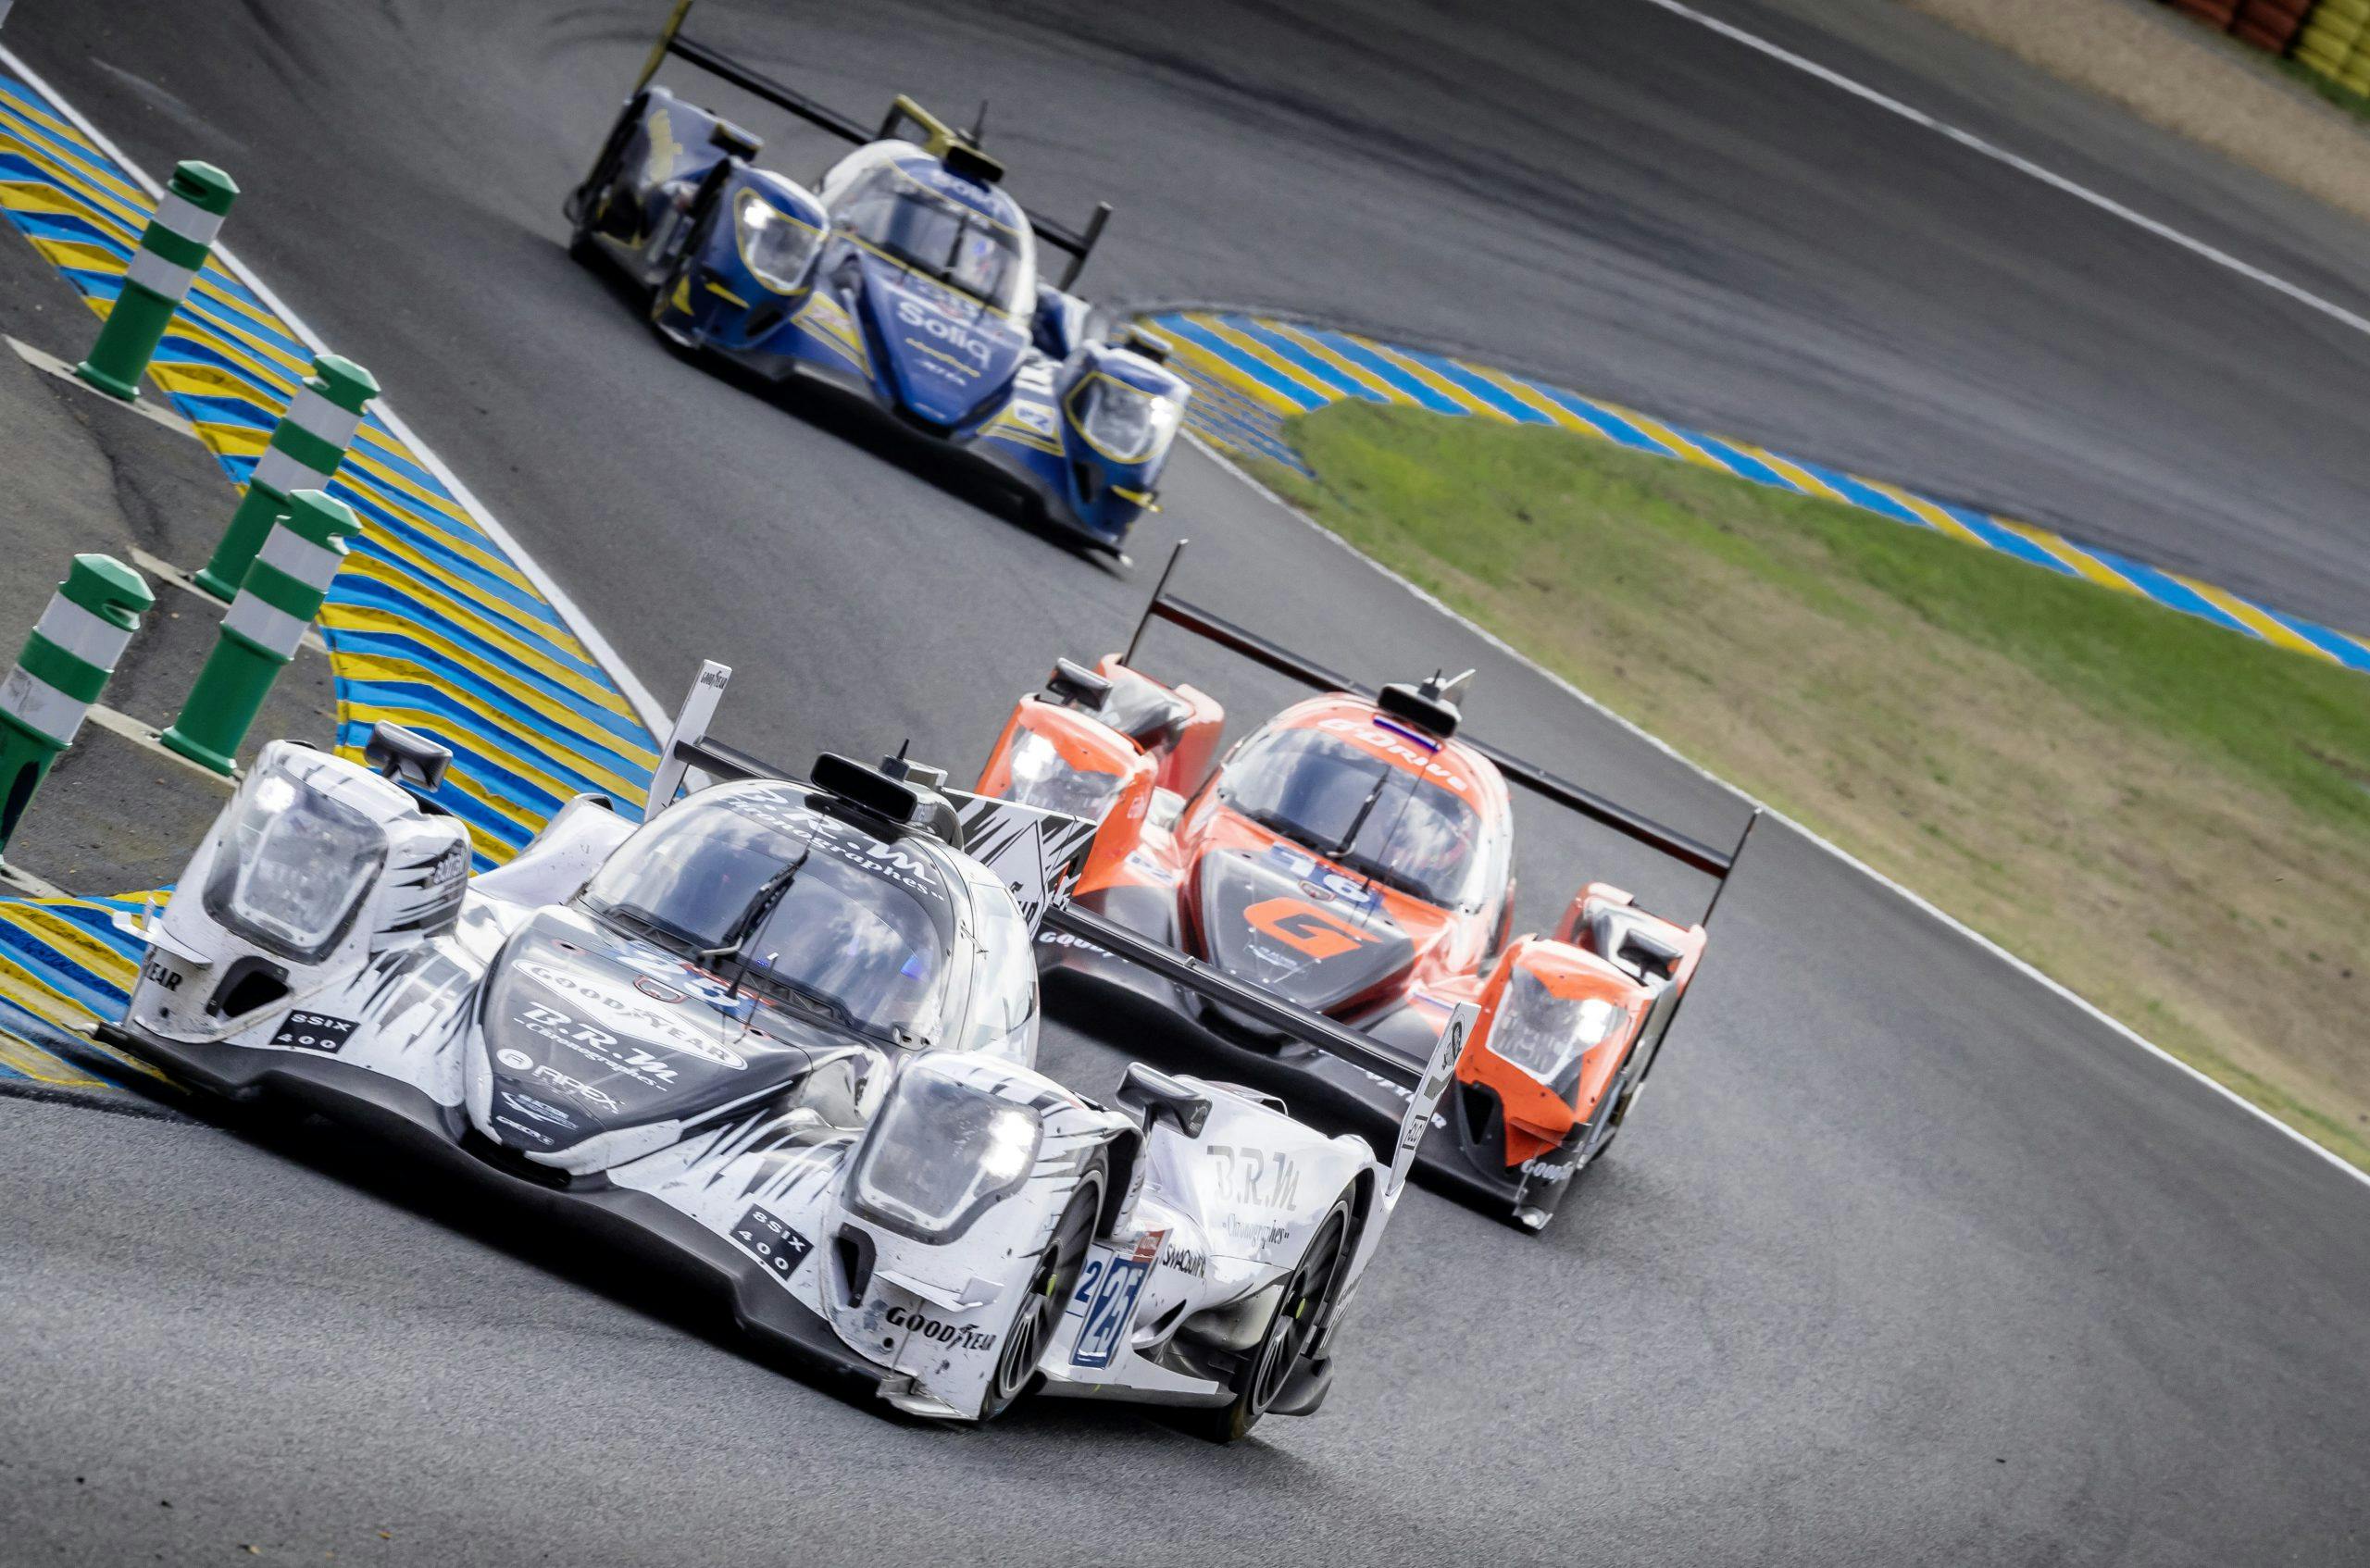 24 hours of Le Mans 2020 dynamic race action